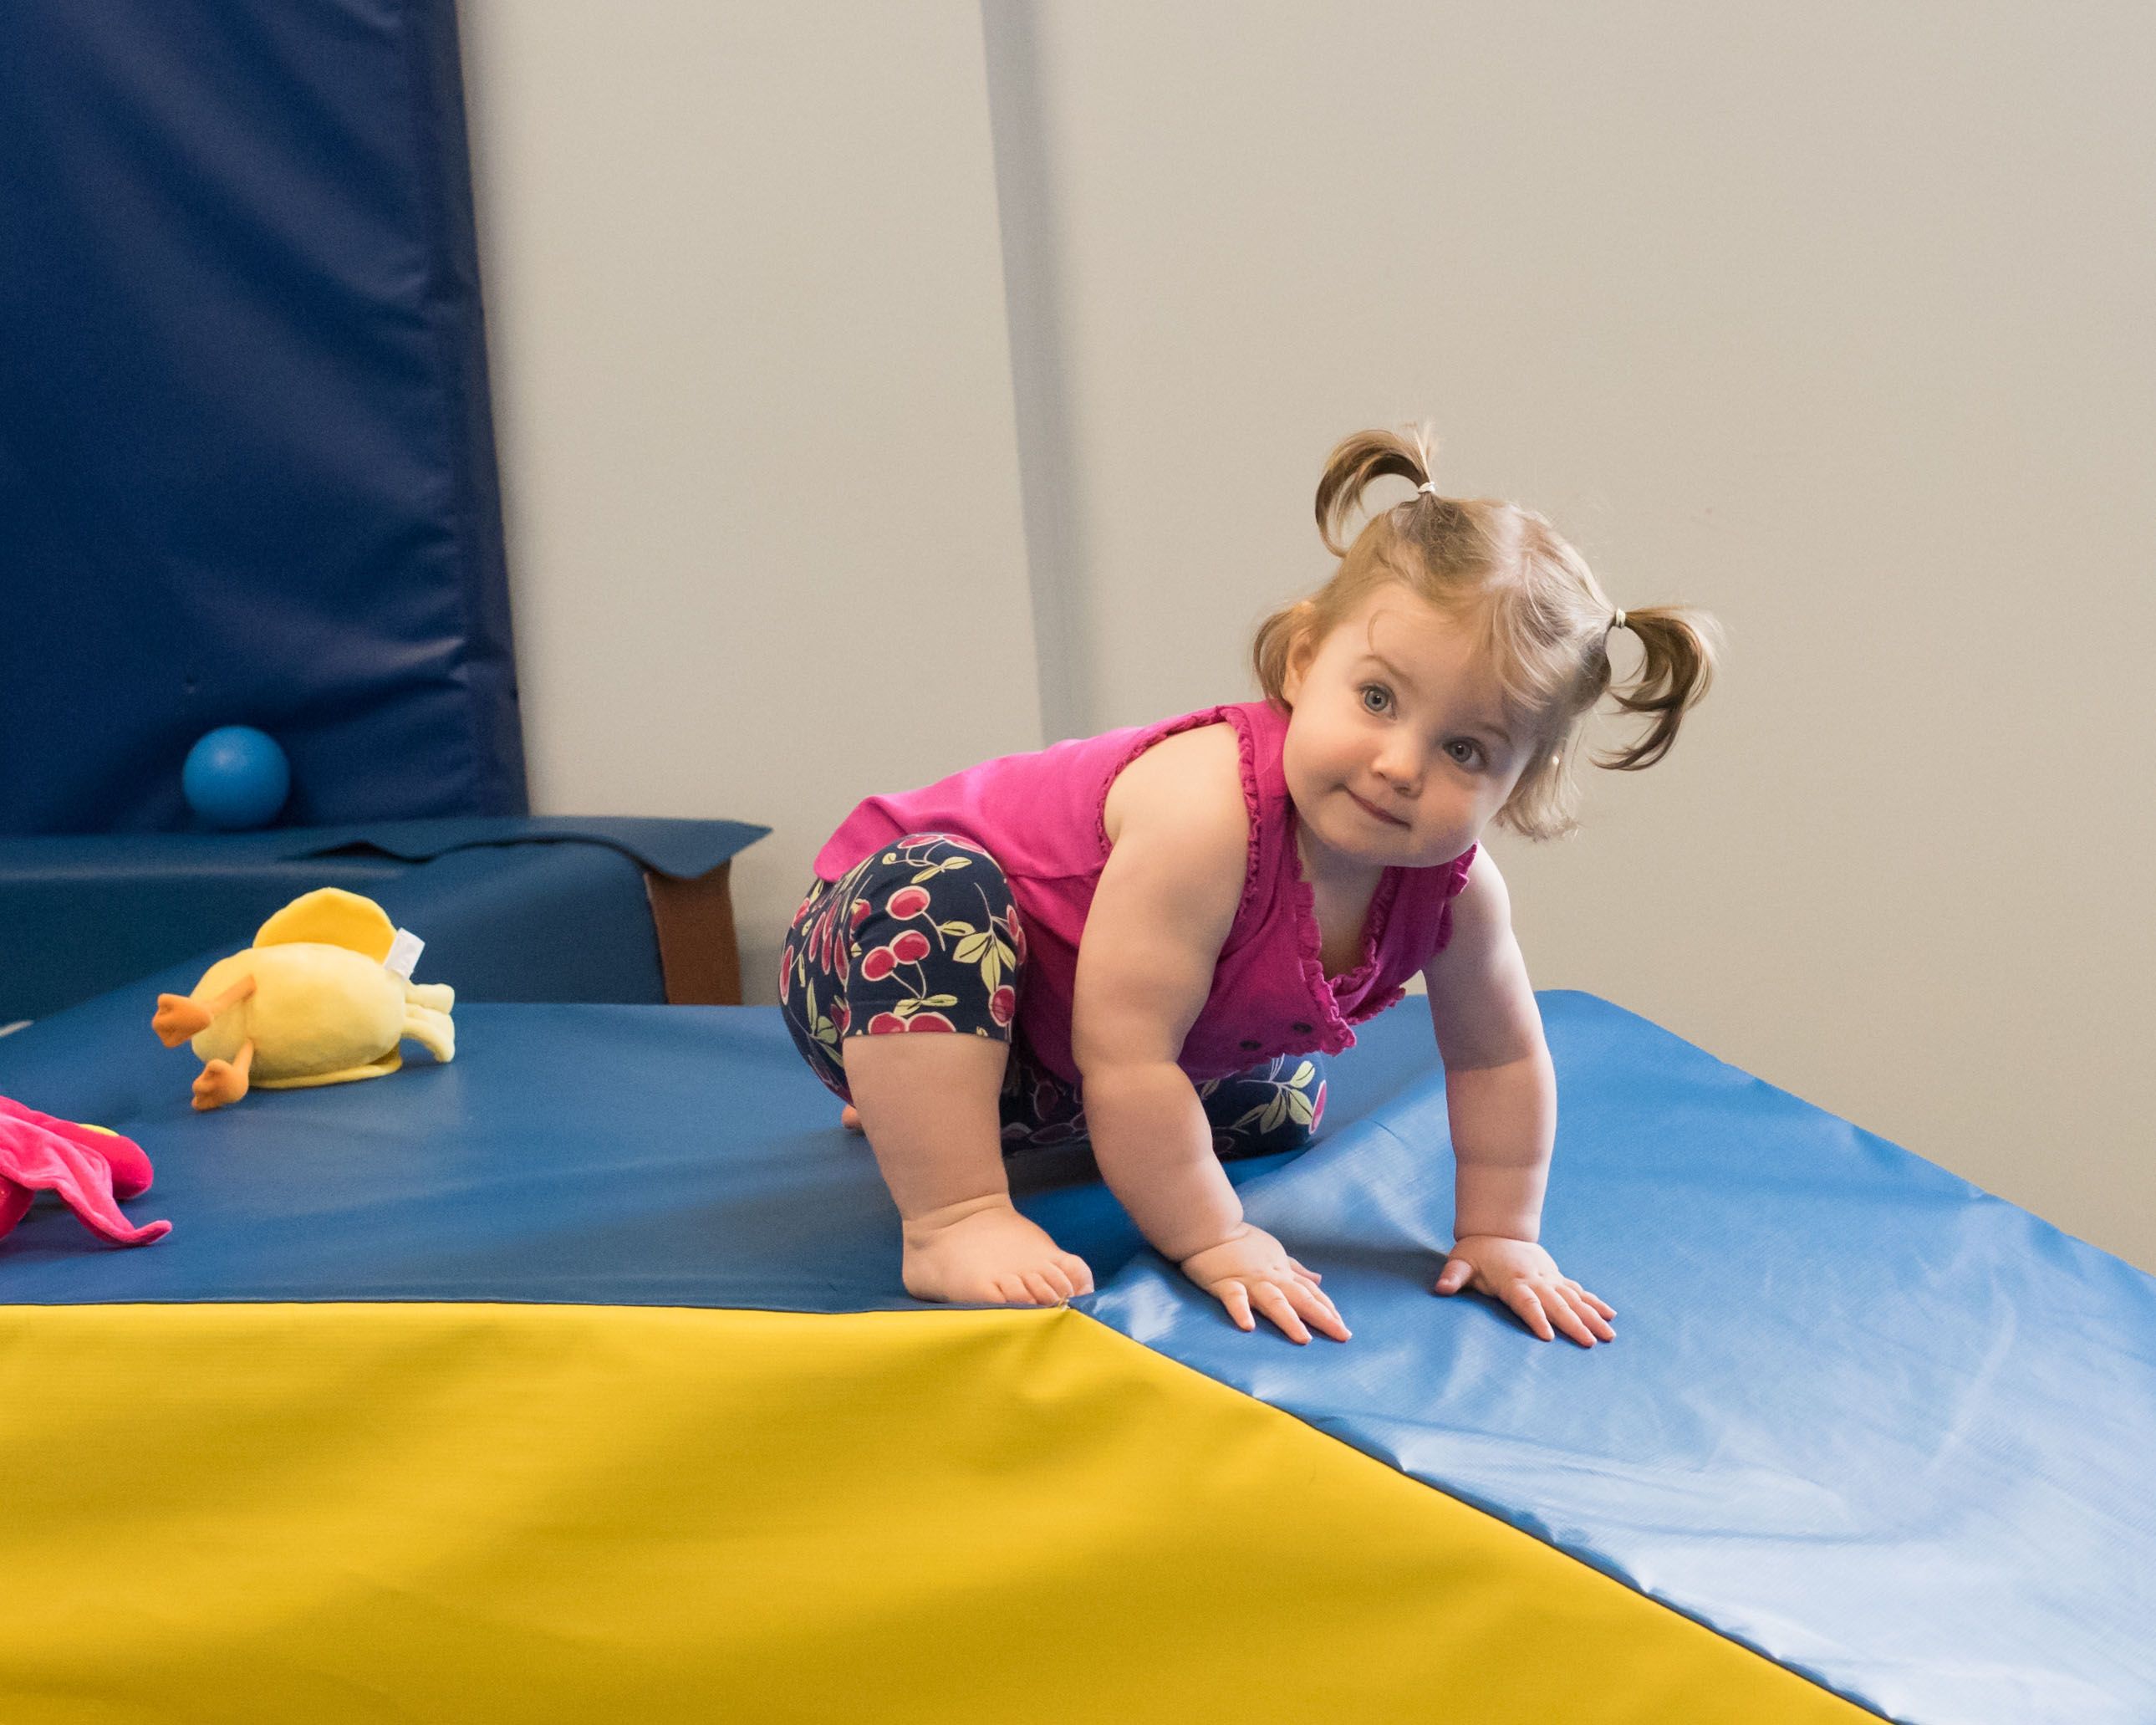 A toddler on a ramp representing sensory integration offered by sensory integration therapy clinic South Shore Therapies in Southern MA